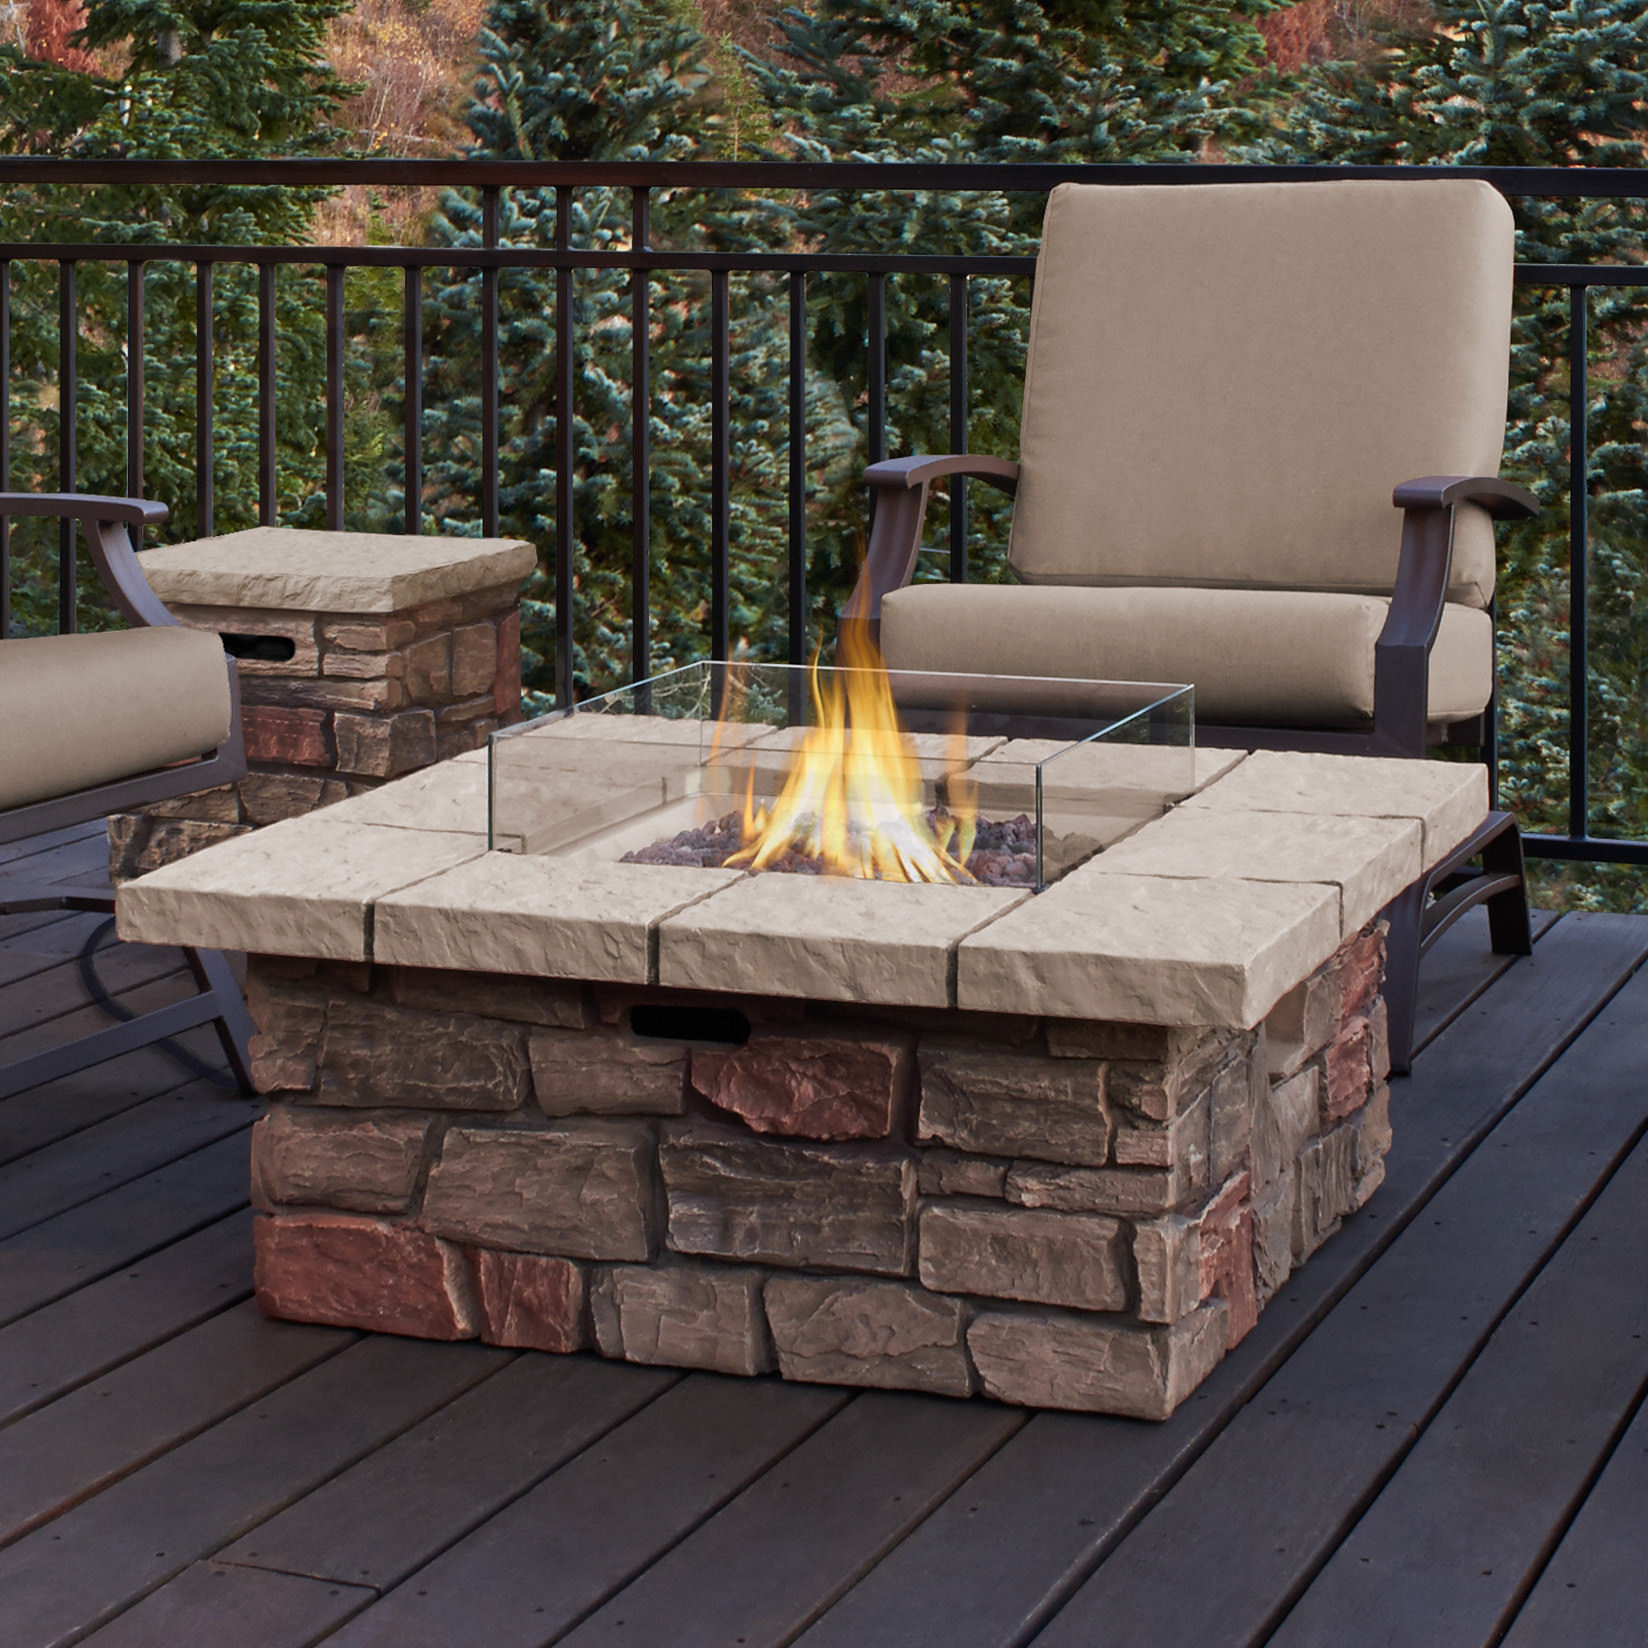 Top 15 Types of Propane Patio Fire Pits with Table (Buying Guide)